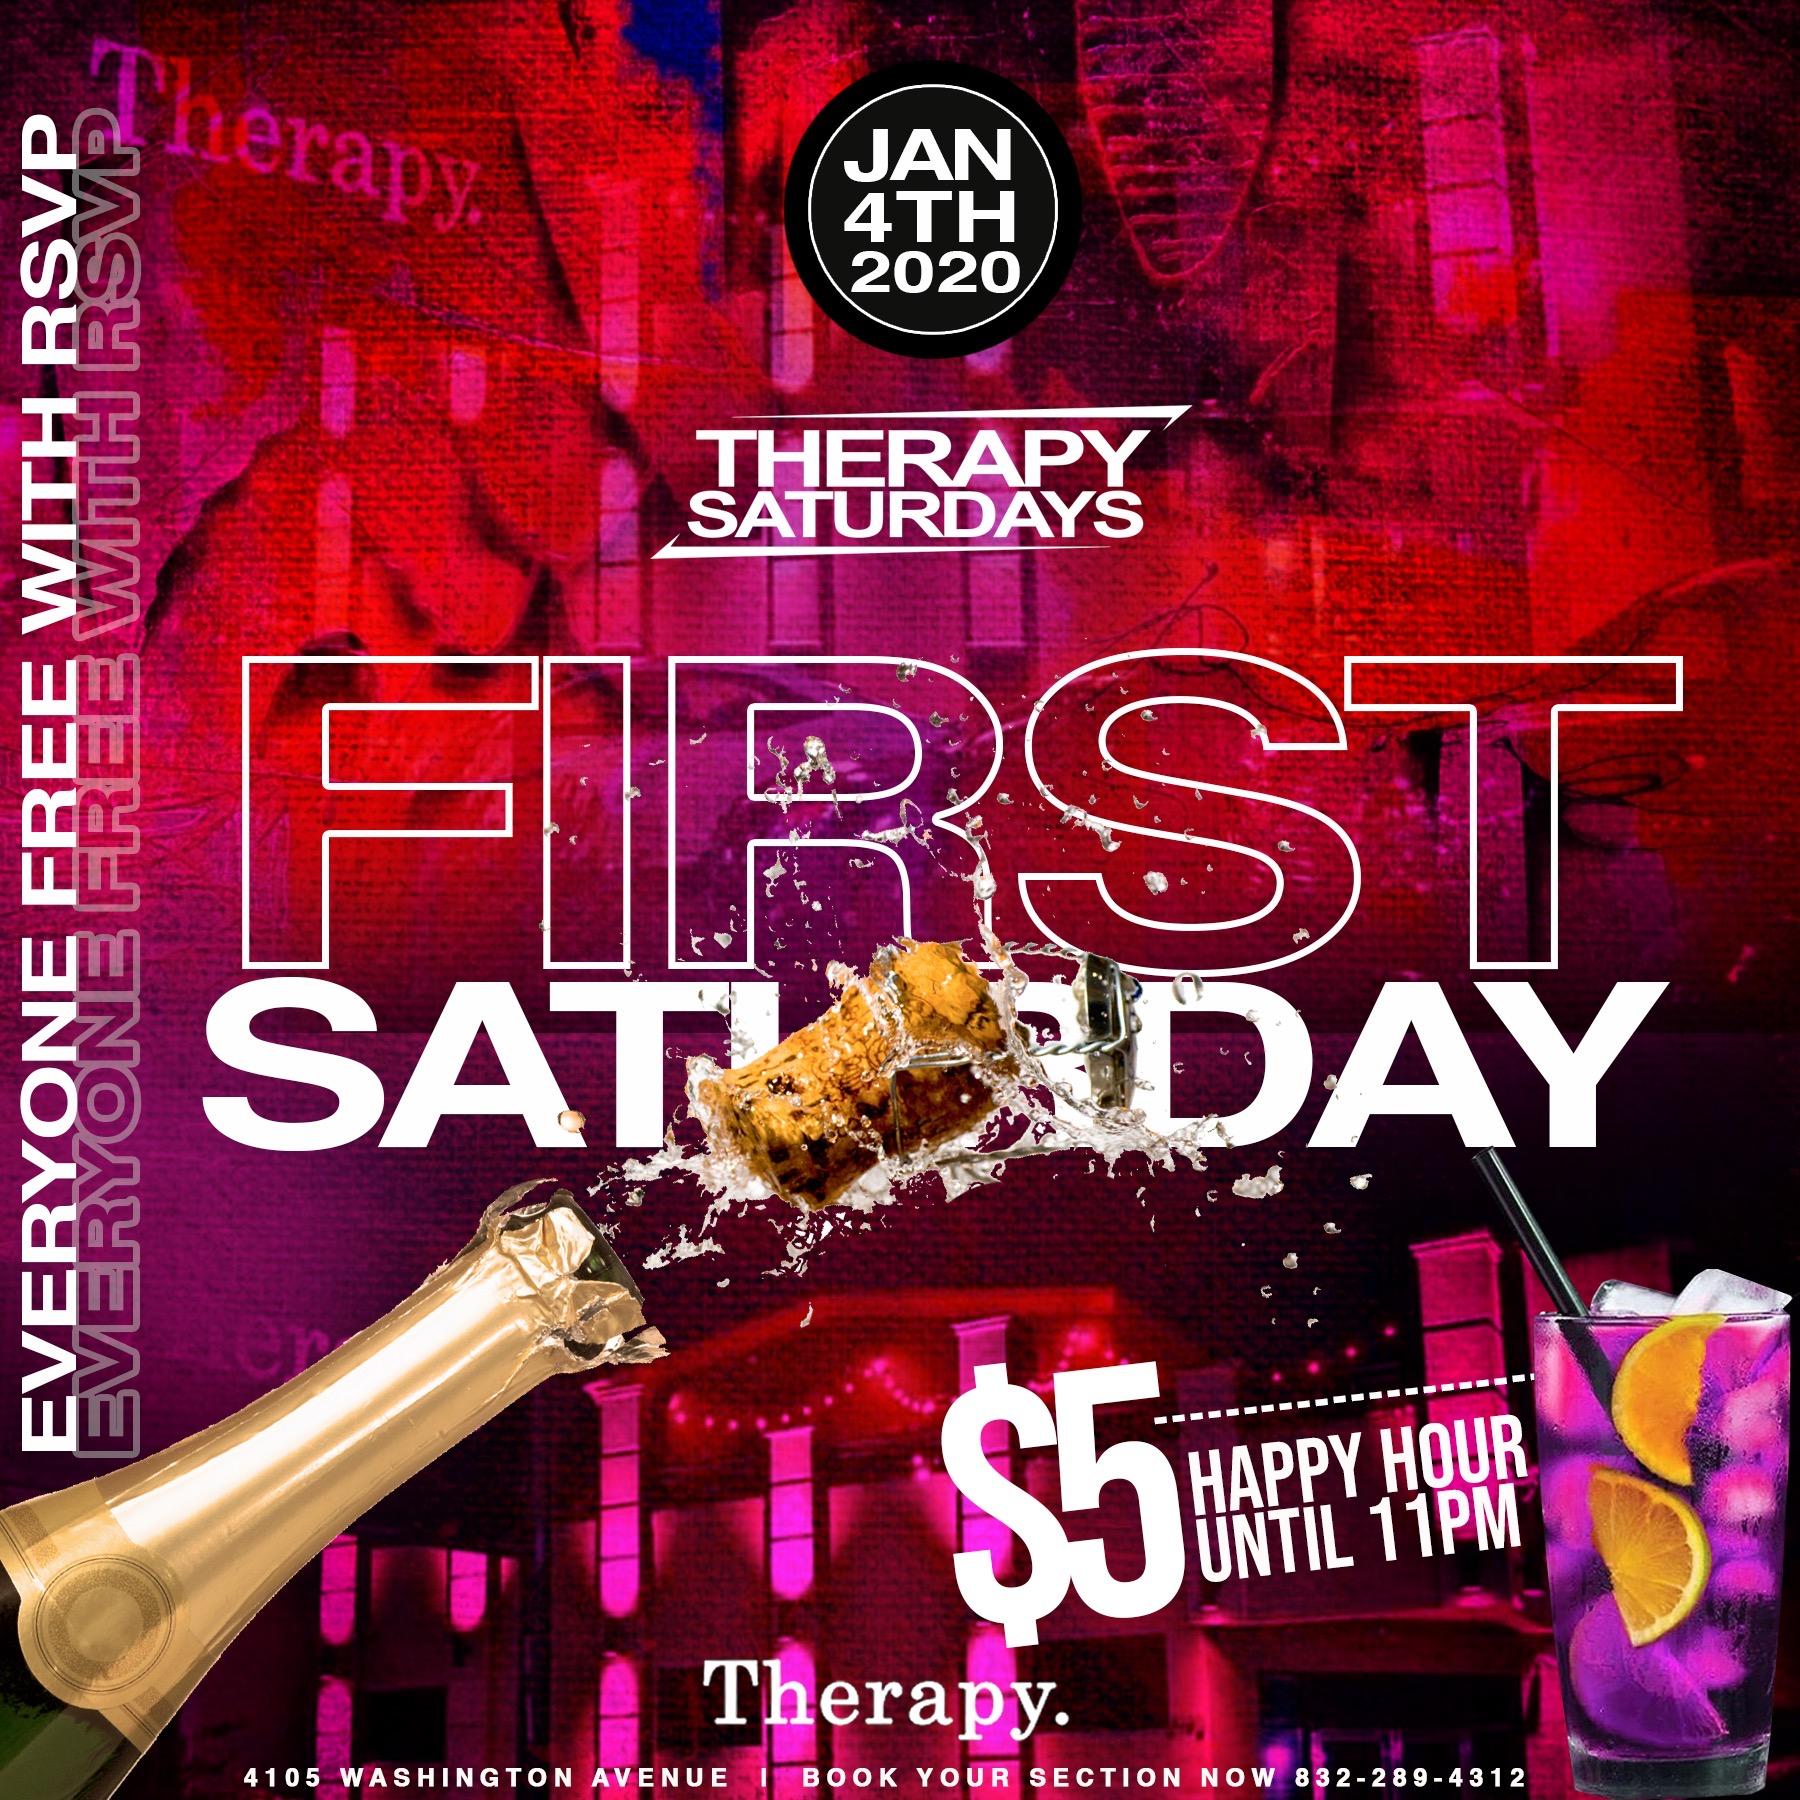 Saturday's On The Ave @ Therapy Night Club | No Cover All Night w/RSVP